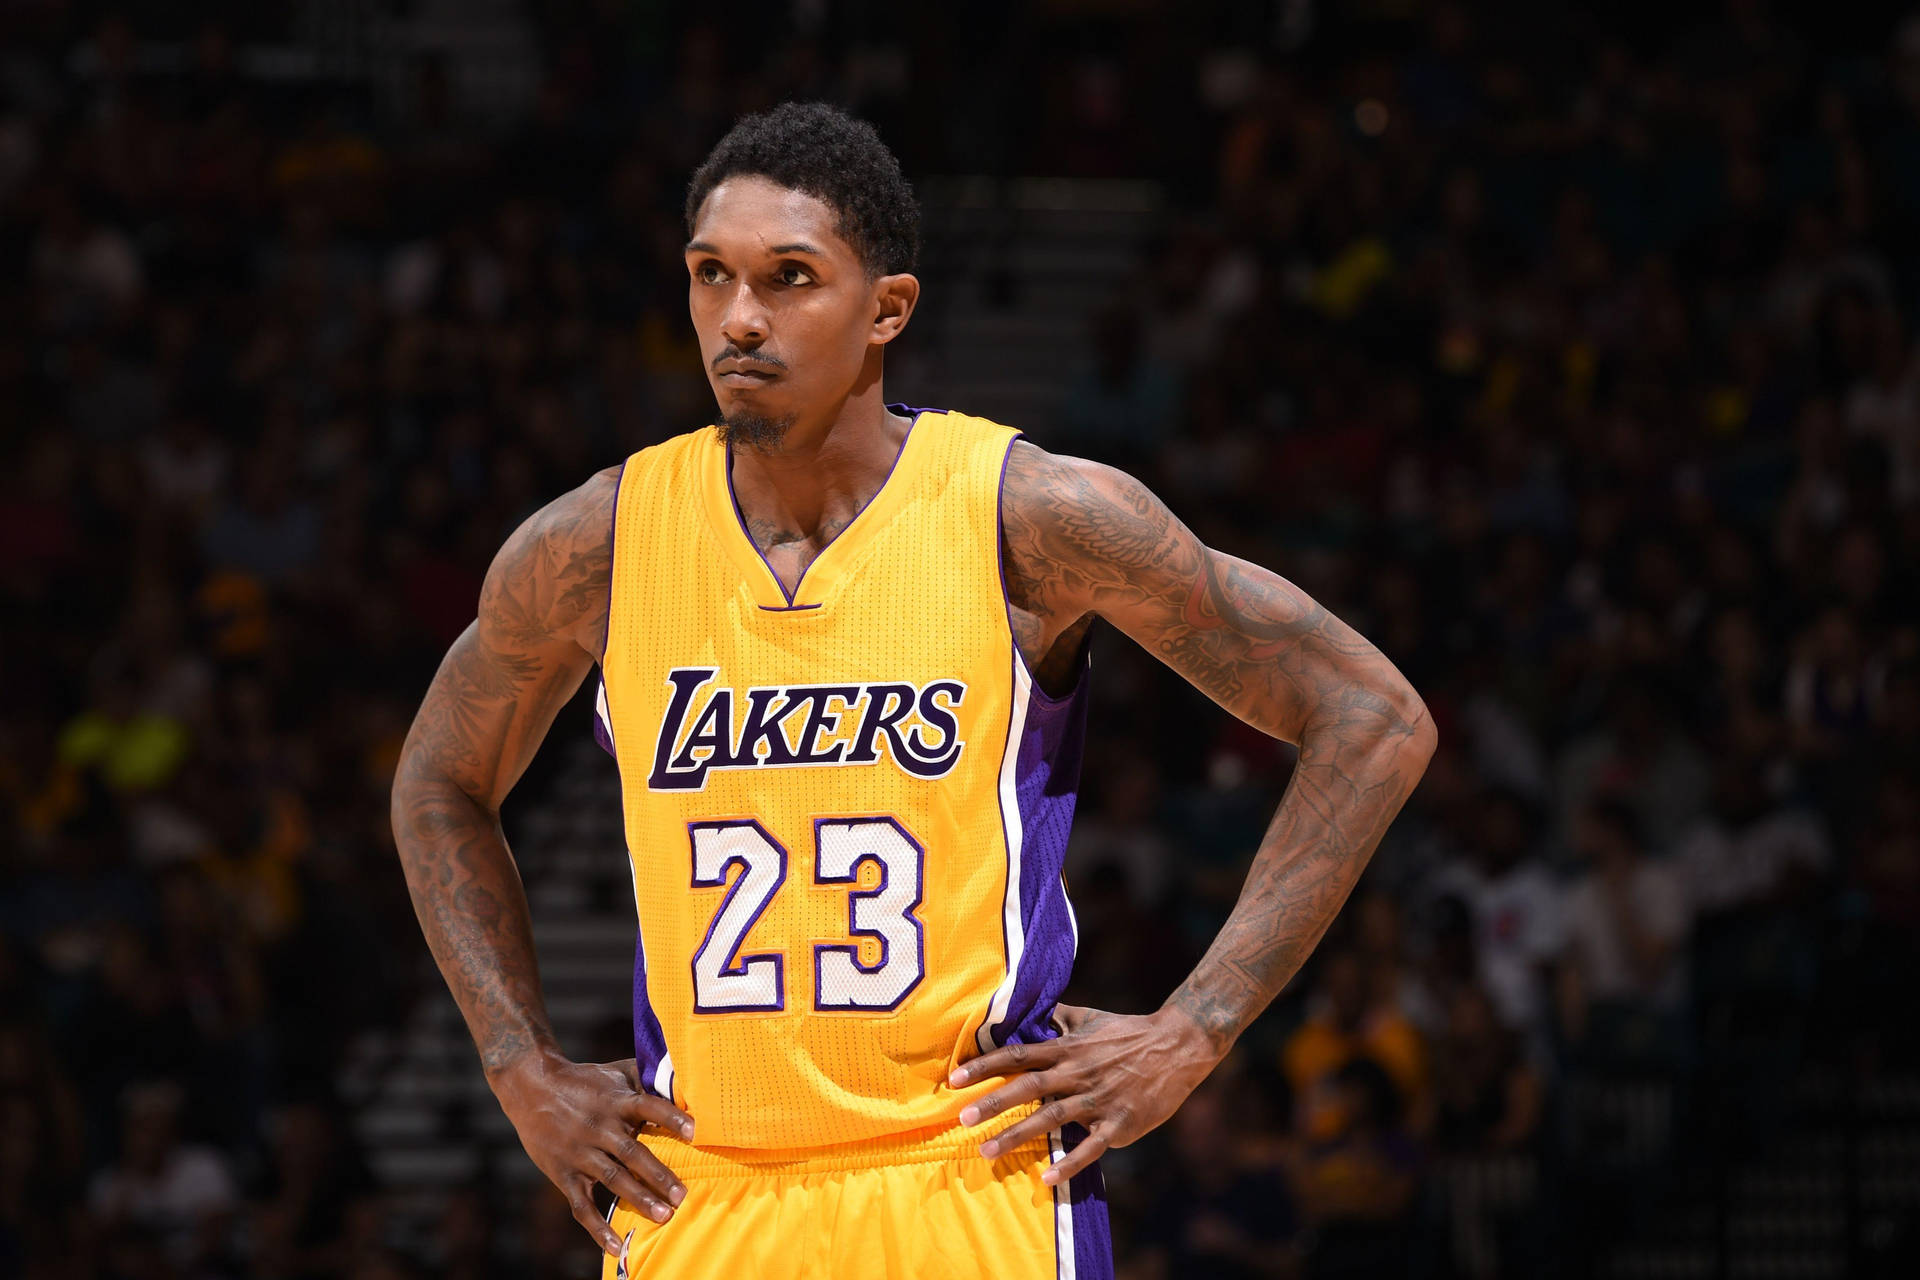 Lou Williams In Lakers Jersey Background